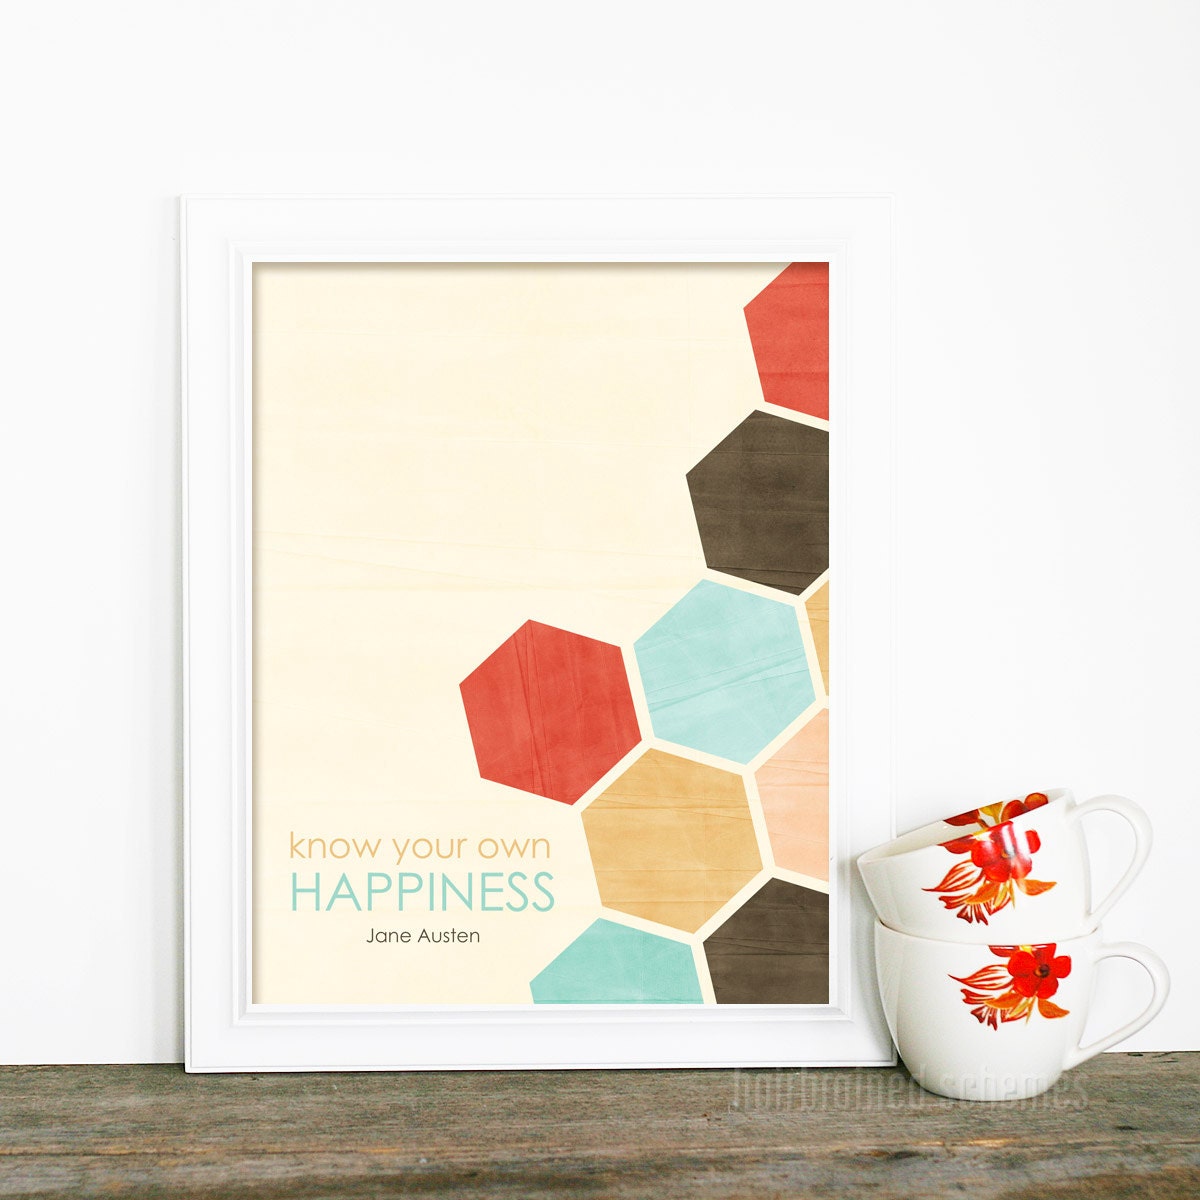 Jane Austen Digital Art Print - Know Your Own Happiness - Geometric Honeycomb Southwest Inspired Aqua Red Brown - hairbrainedschemes